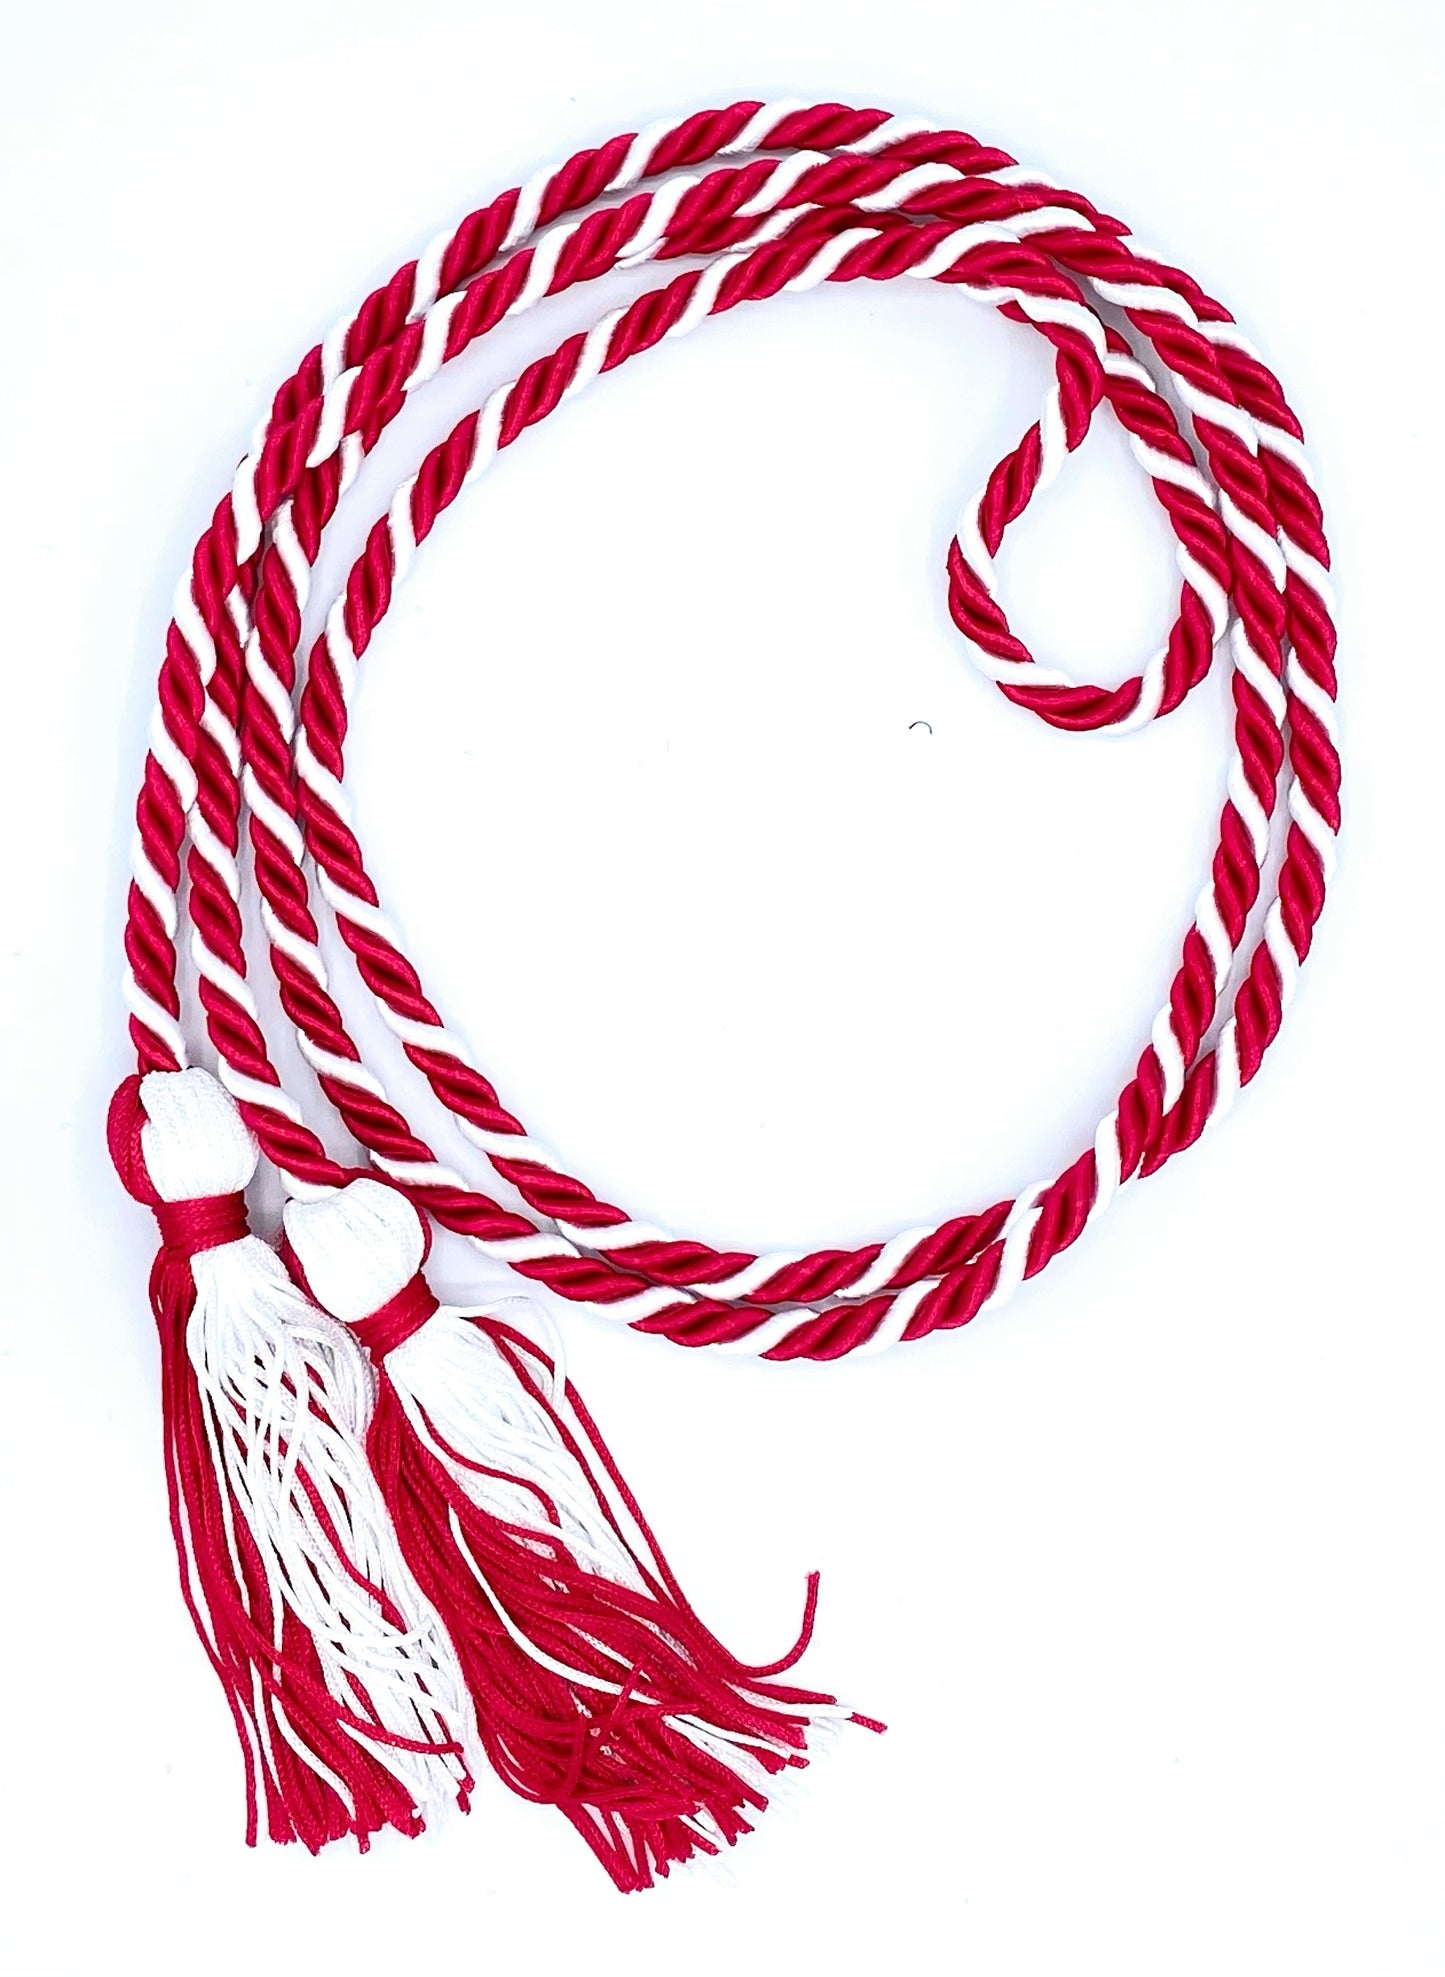 Red/White Honor Cords  Honor Cord Source – Honor Cord Source